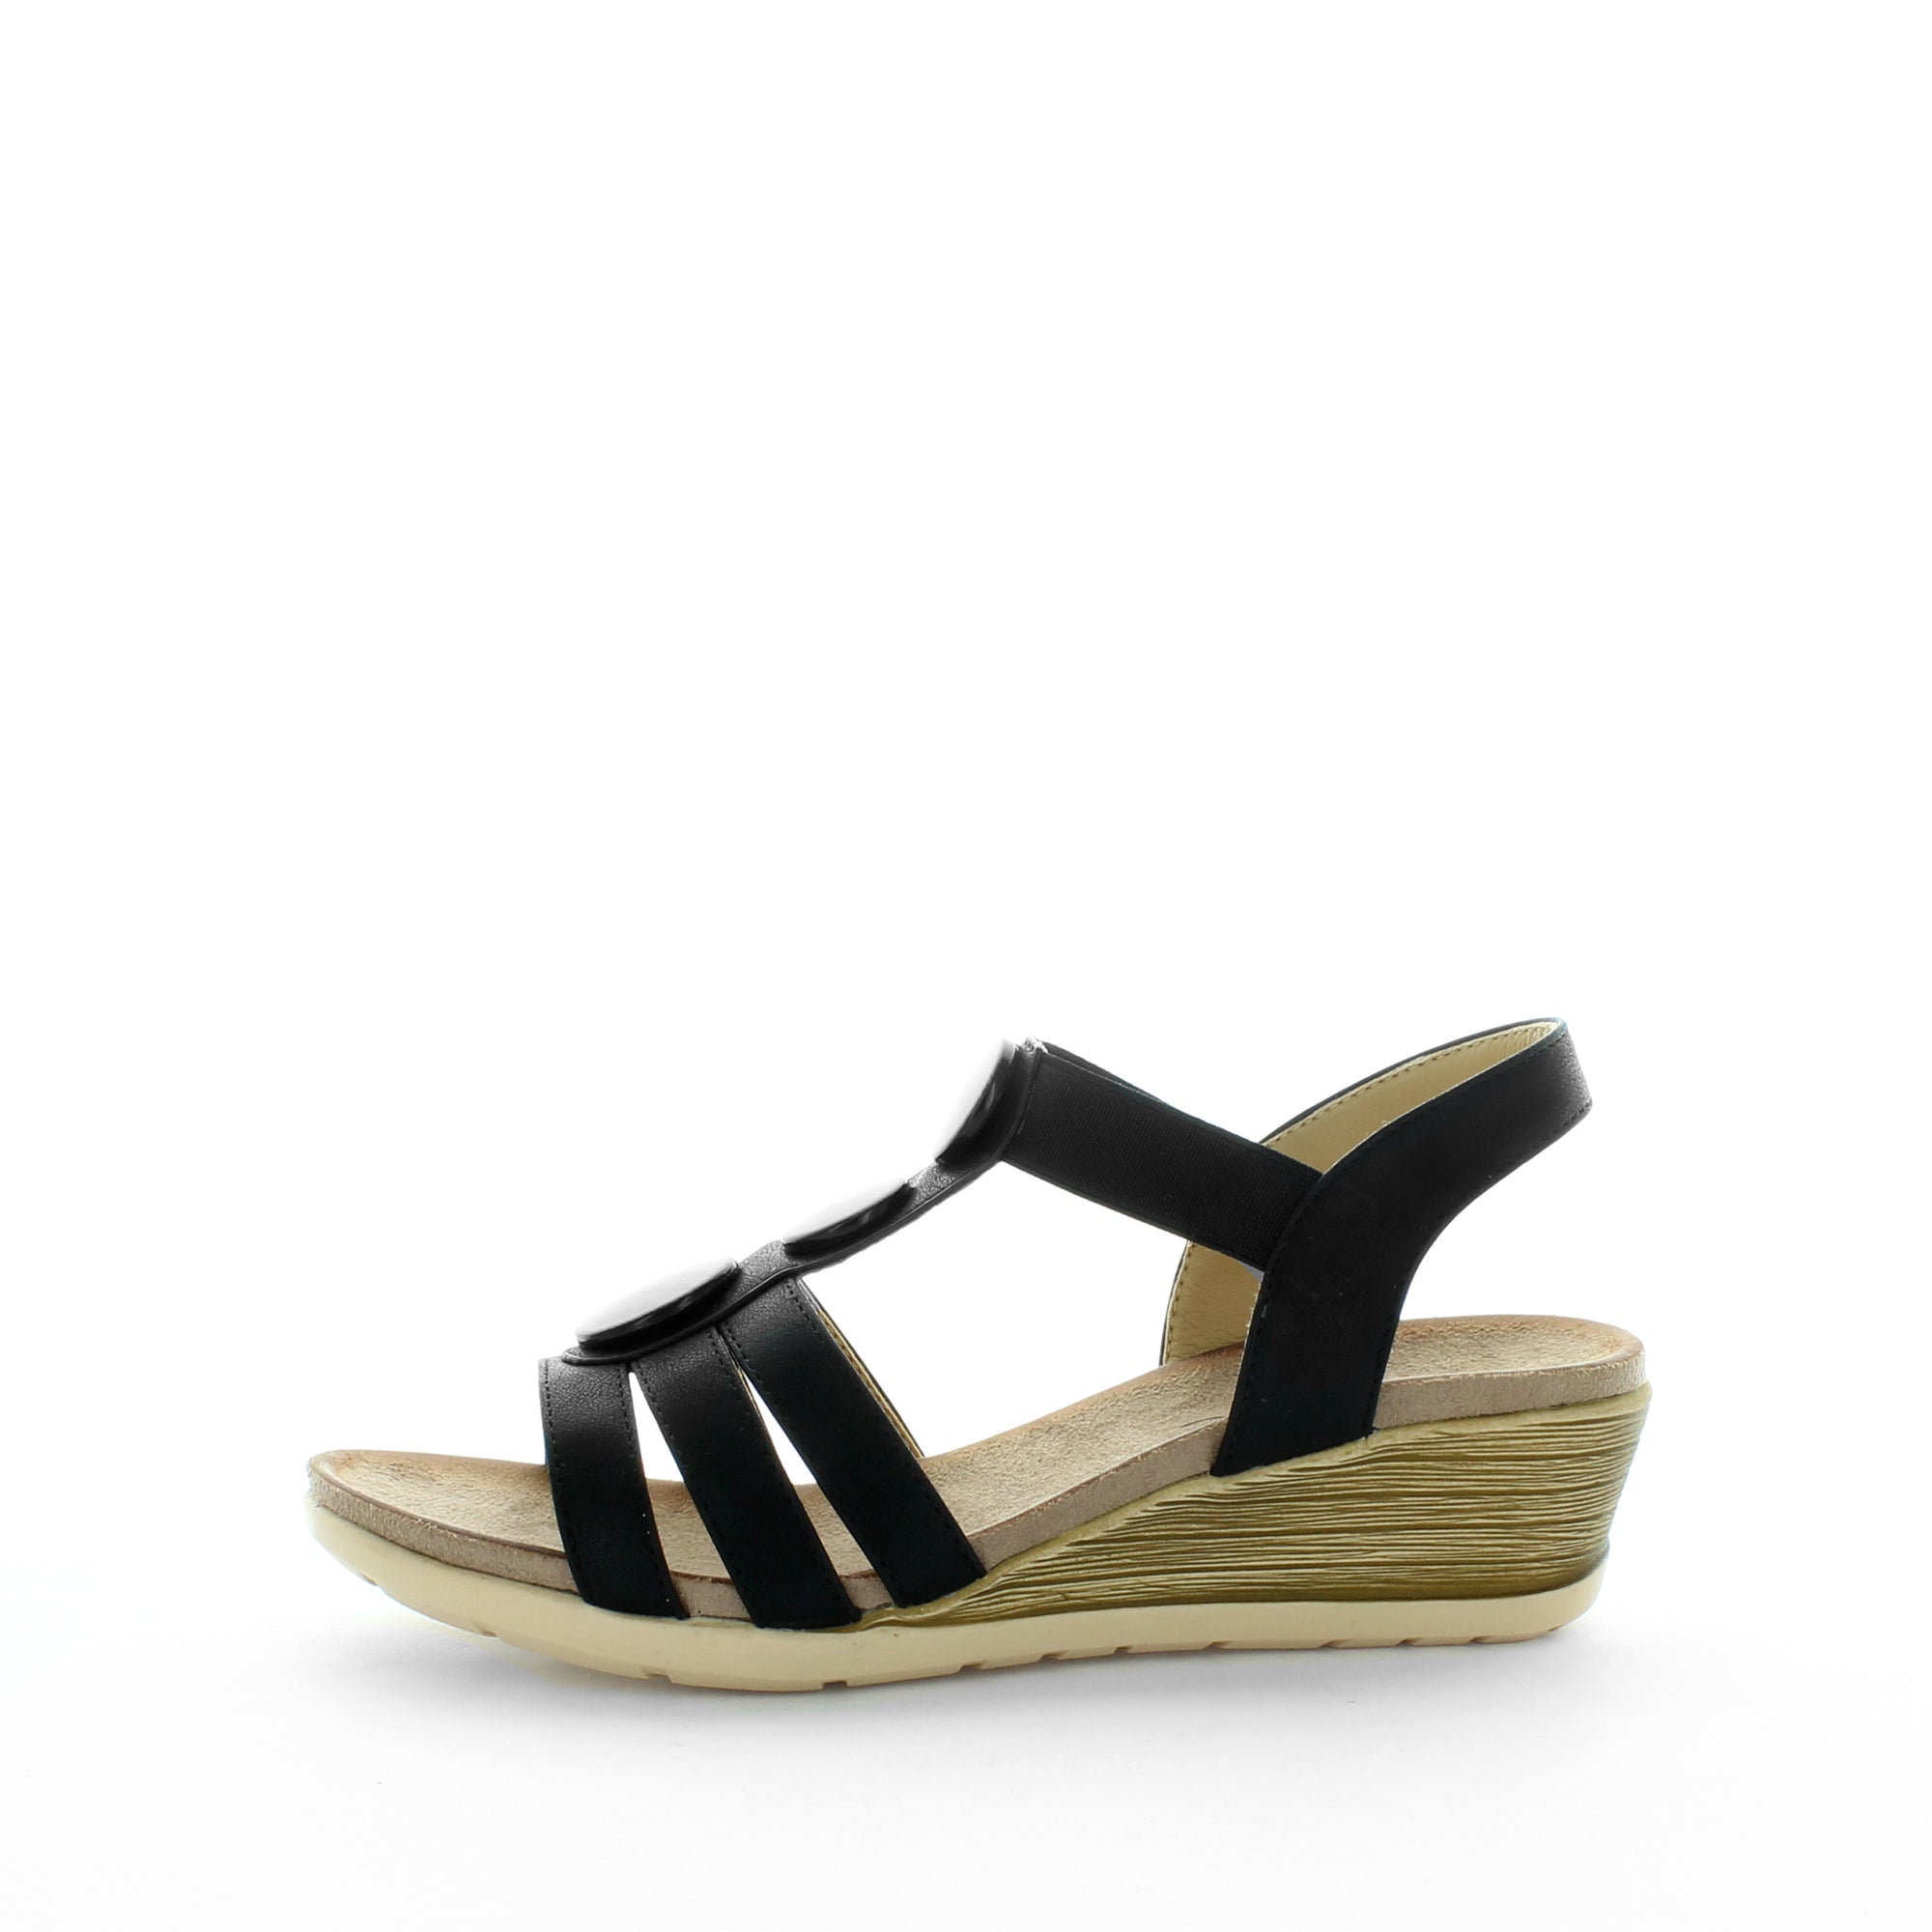 SAURA by WILDE - iShoes - NEW ARRIVALS, What's New, What's New: Most Popular, What's New: Women's New Arrivals, Women's Shoes: Sandals - FOOTWEAR-FOOTWEAR